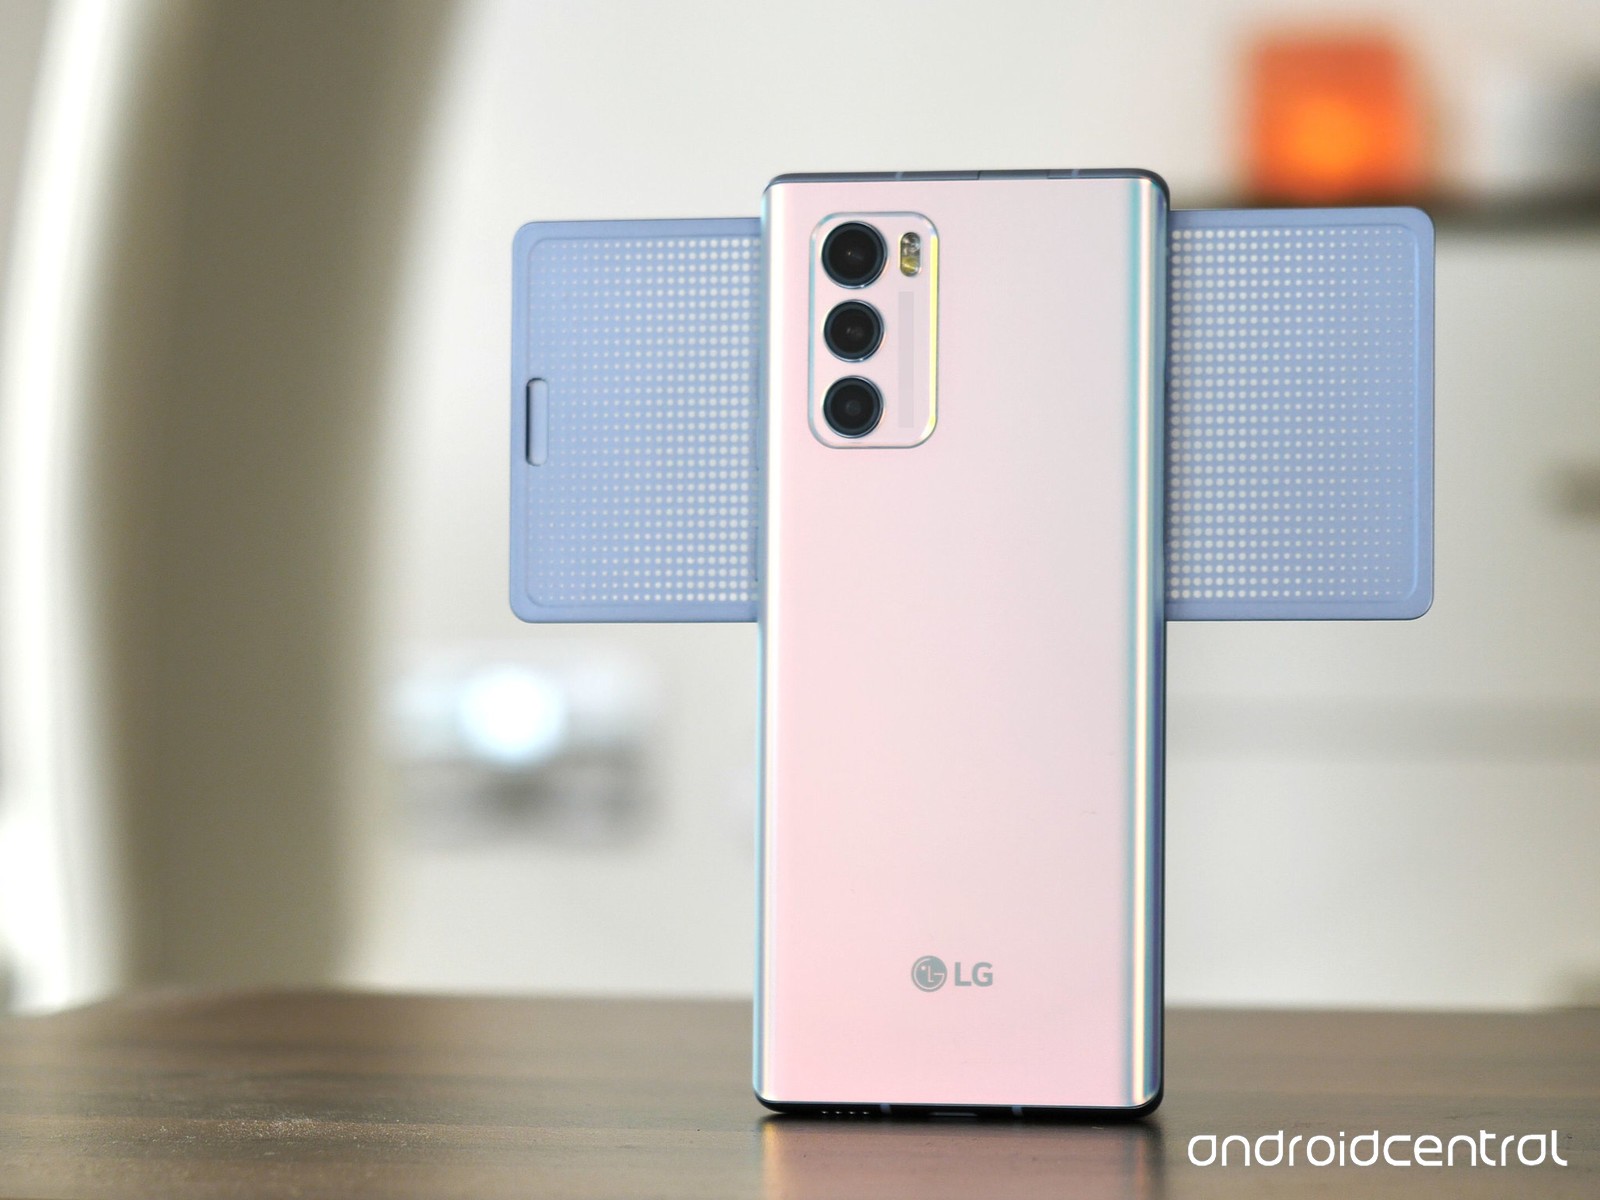 lg-wing-review-6.jpg